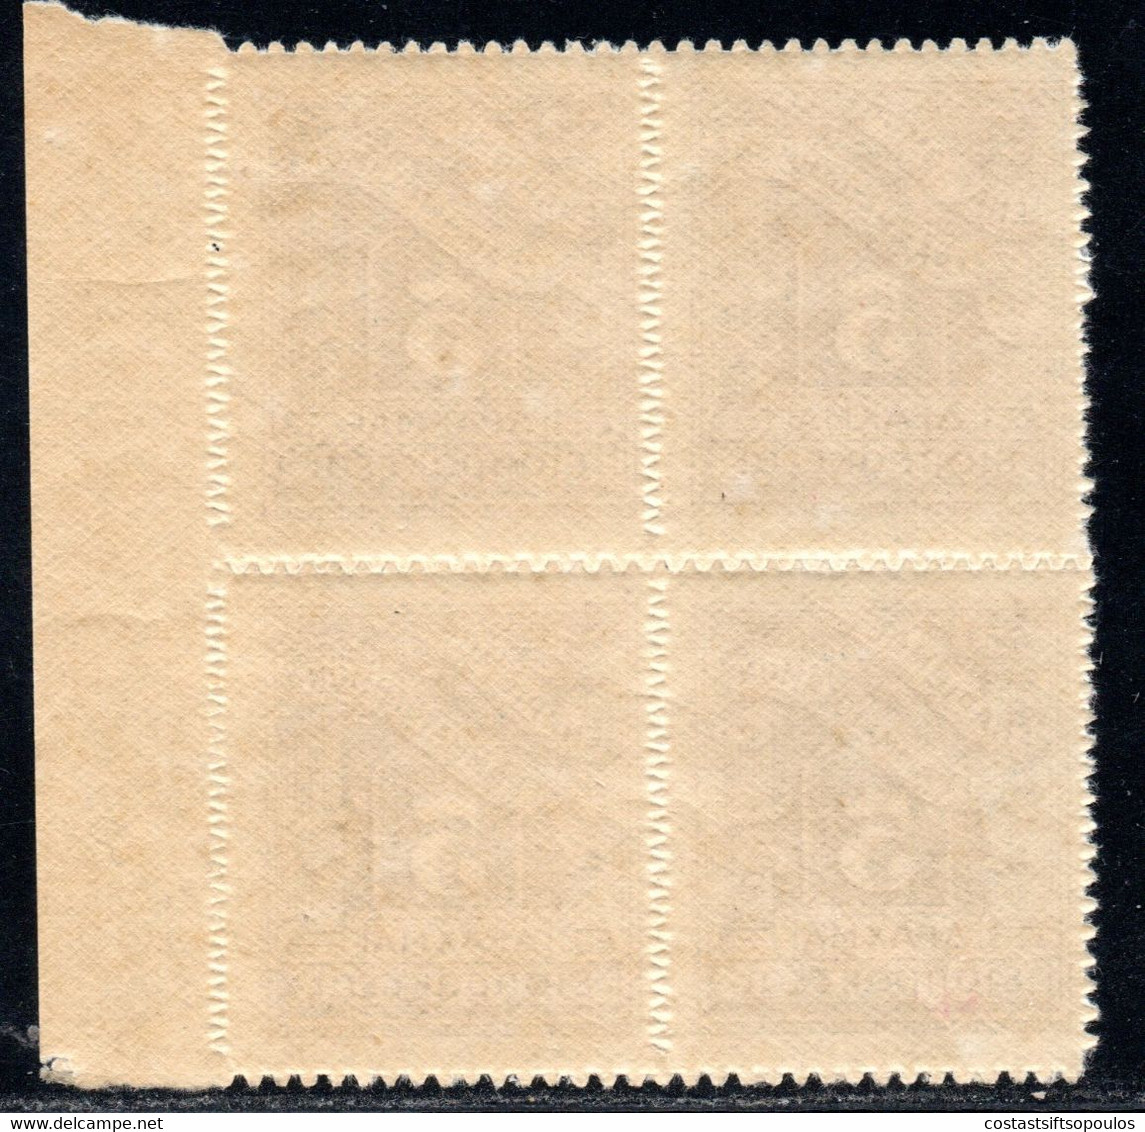 1395. GREECE.1913-1928 POSTAGE DUE. 5 DR. MNH BLOCK OF 4  VERY FINE AND FRESH. - Nuevos